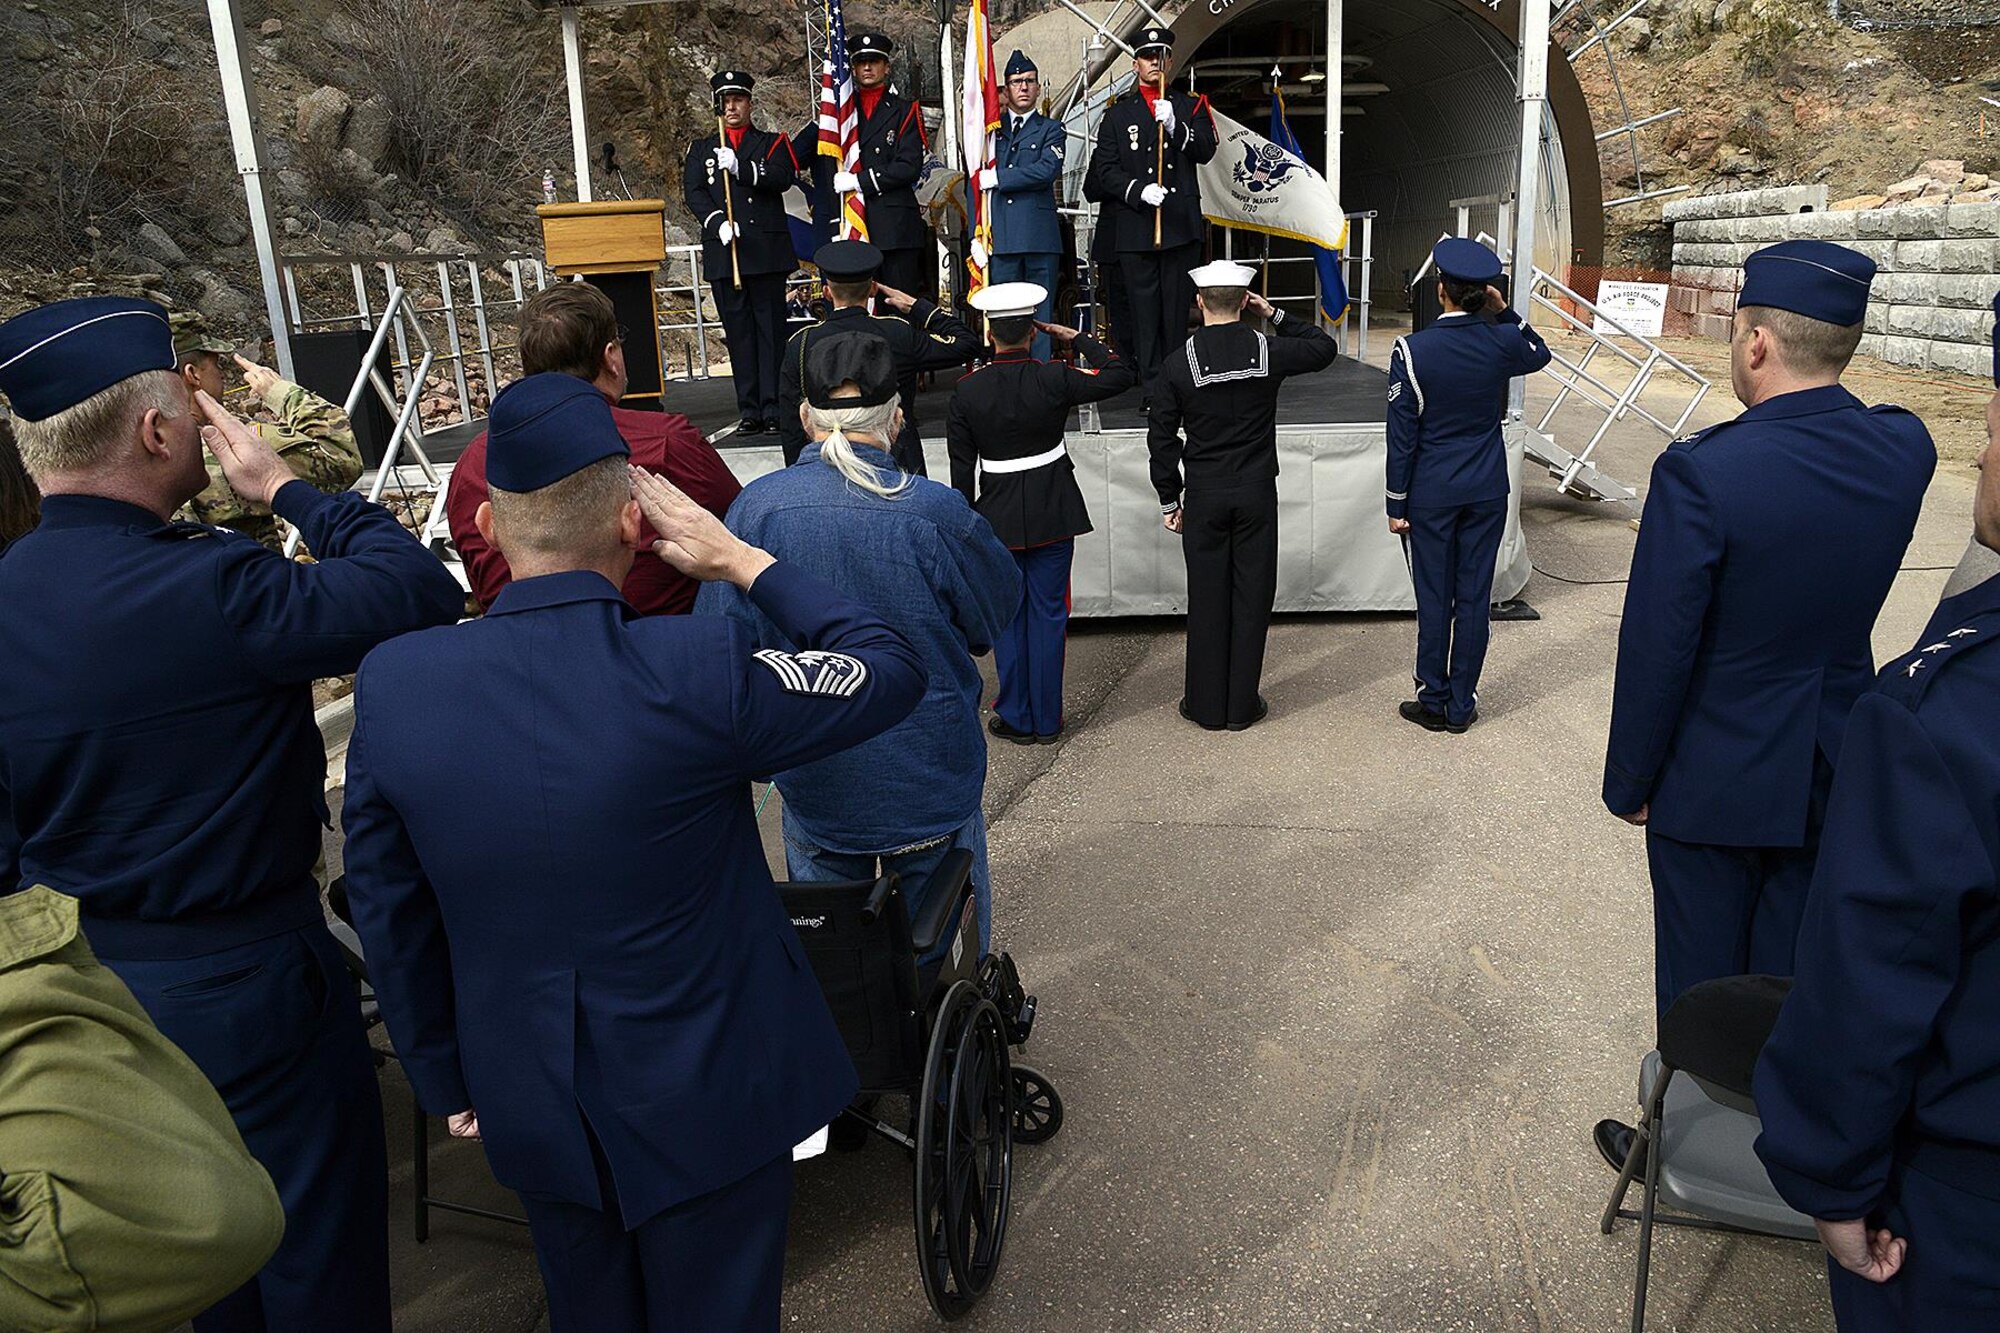 Attendees of the 50th anniversary rededication ceremony pay respect during the U.S. and Canadian national anthems at Cheyenne Mountain Air Force Station, Colo., April 15, 2016. After nearly five years of construction, Cheyenne Mountain AFS was declared fully operational April 20, 1966. Cheyenne Mountain AFS is owned by the 21st Space Wing at Peterson Air Force Base, Colo., and operated by the 721st Mission Support Group. (U.S. Air Force photo/Rob Bussard)